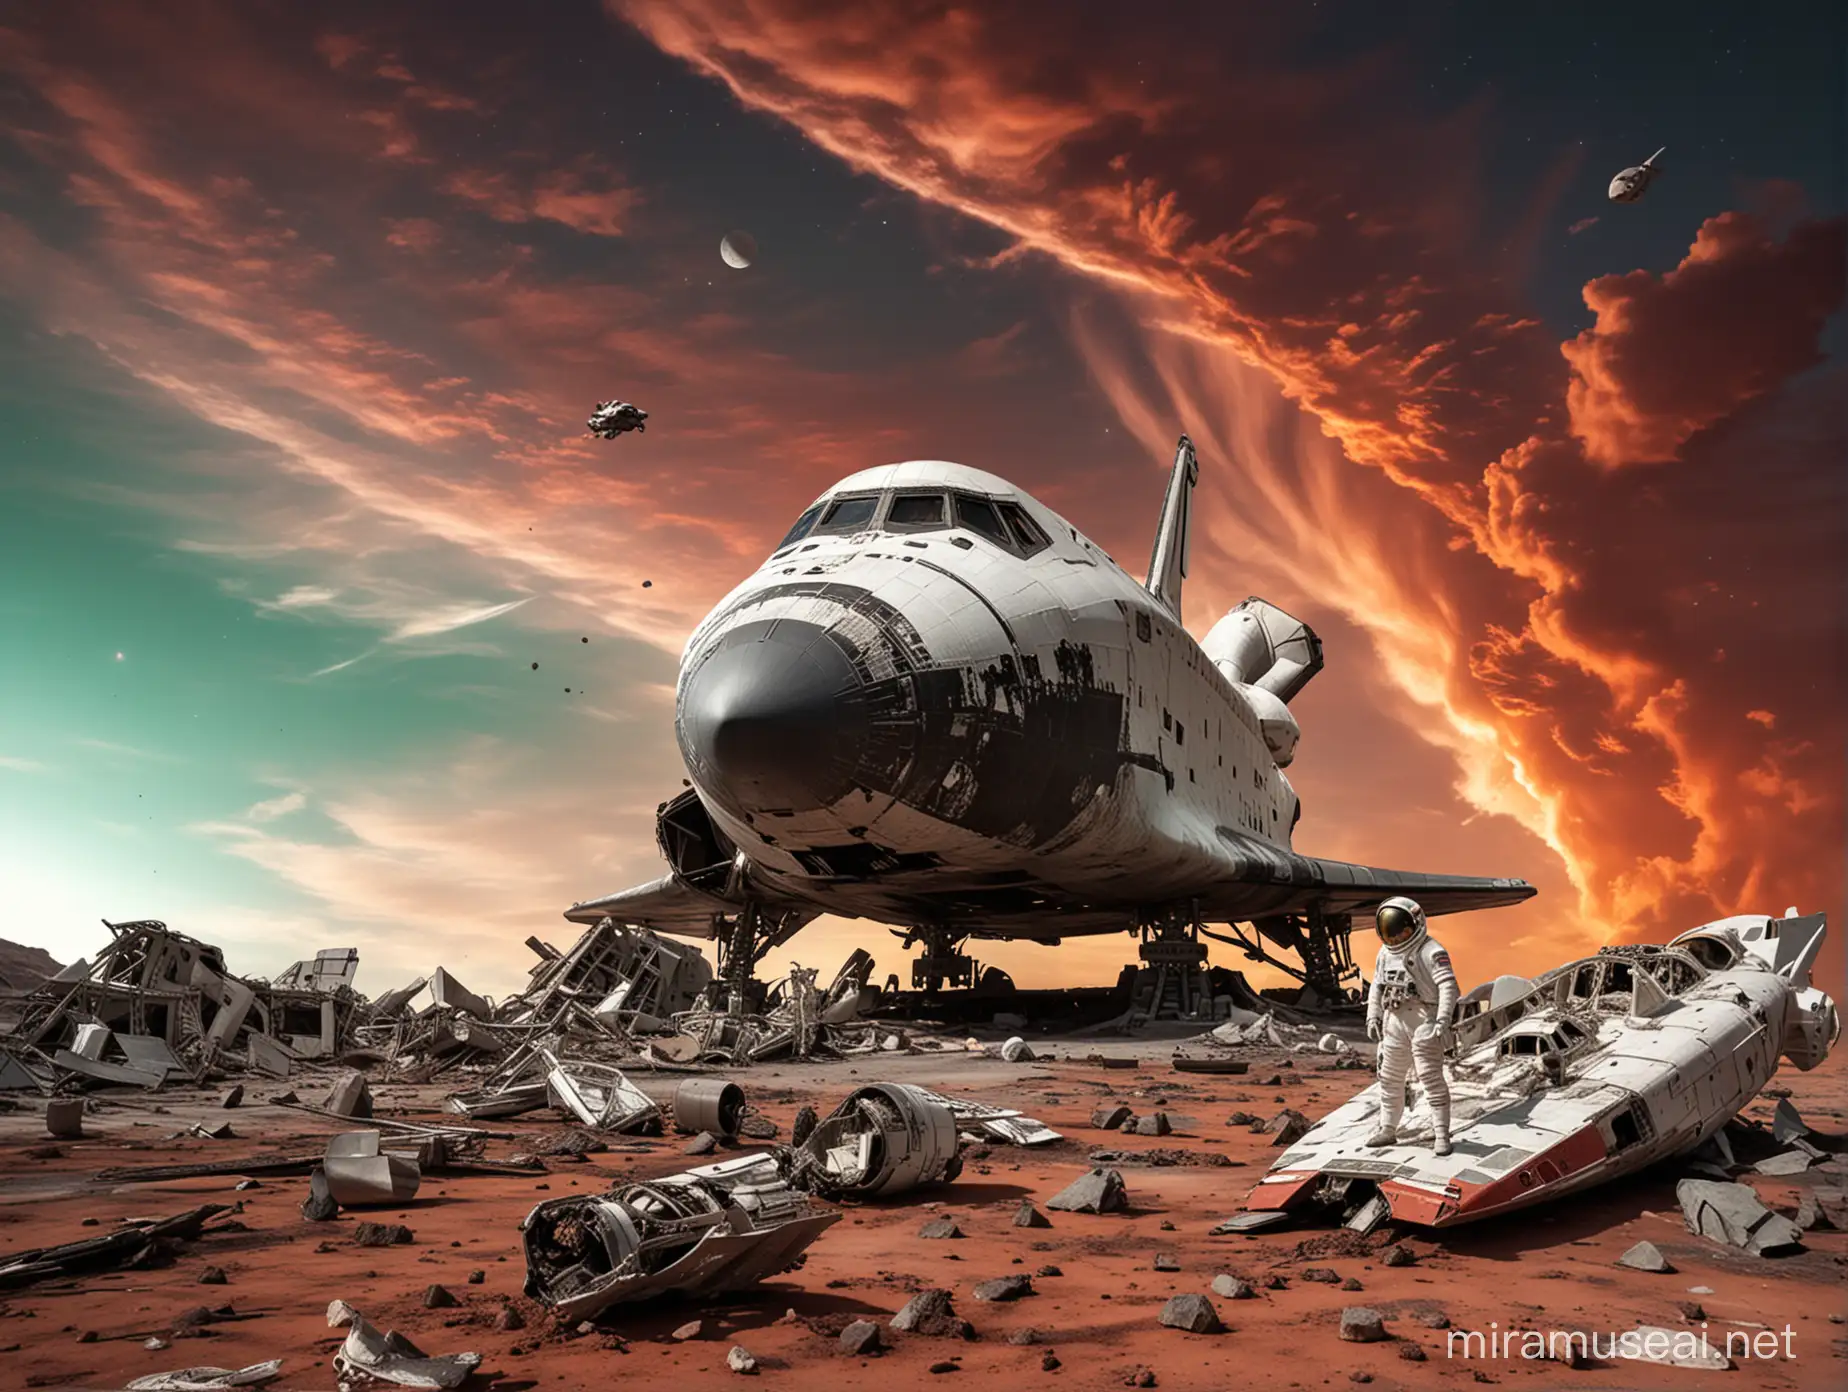 Astronaut Standing by Damaged Space Shuttle and Alien Craft Under Red Sky